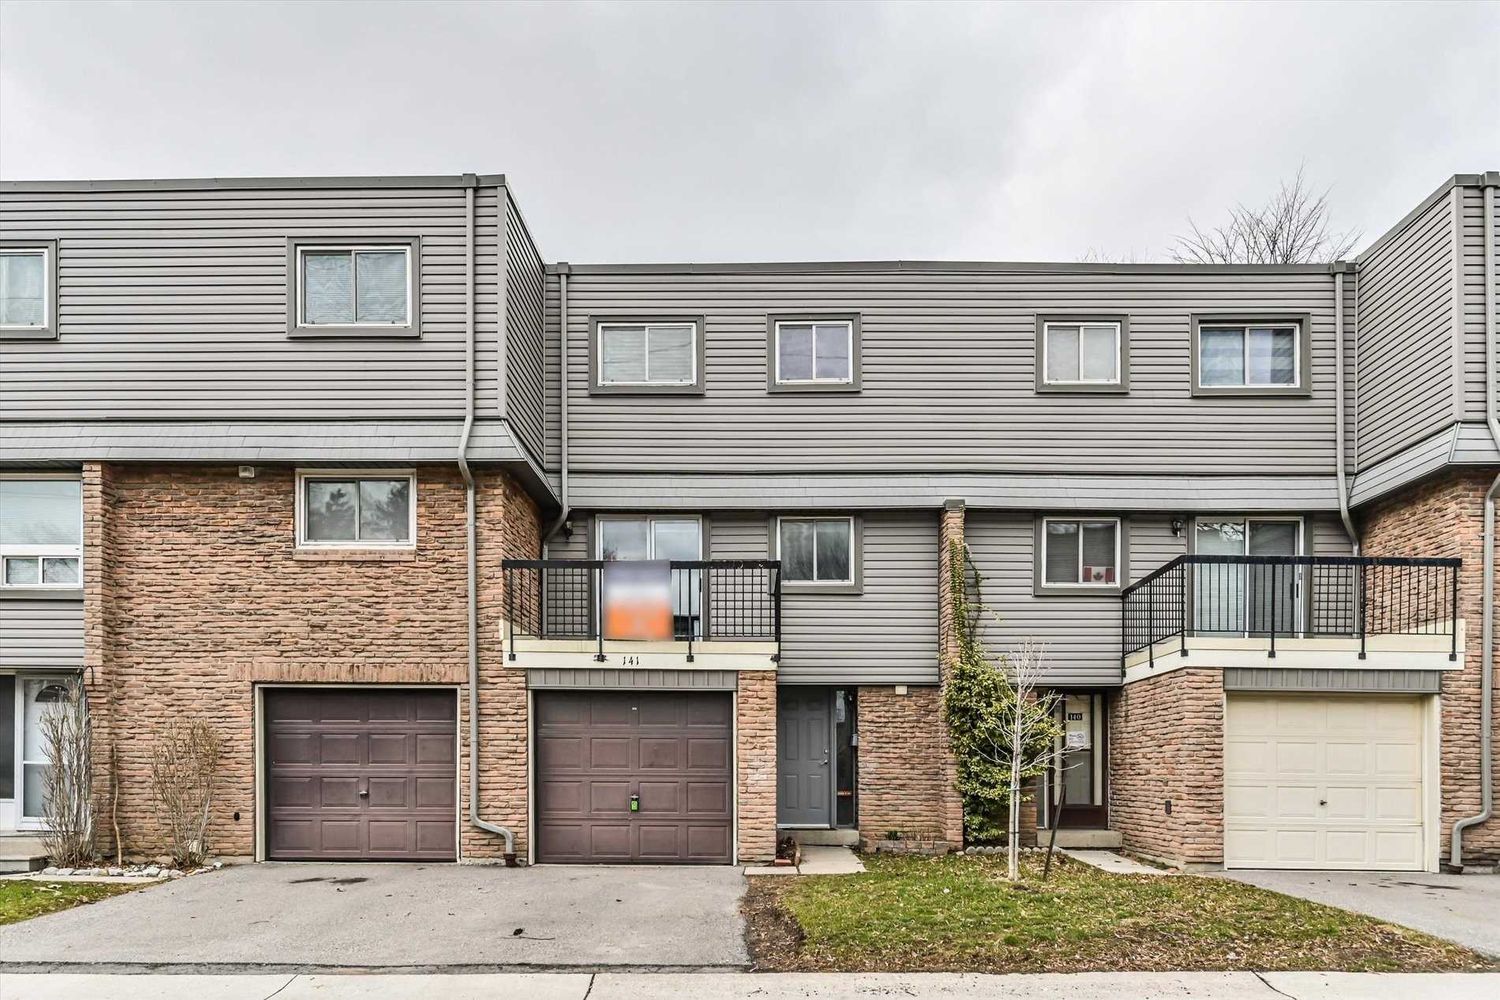 2315 Bromsgrove Road. 2315 Bromsgrove Rd Townhomes is located in  Mississauga, Toronto - image #2 of 2